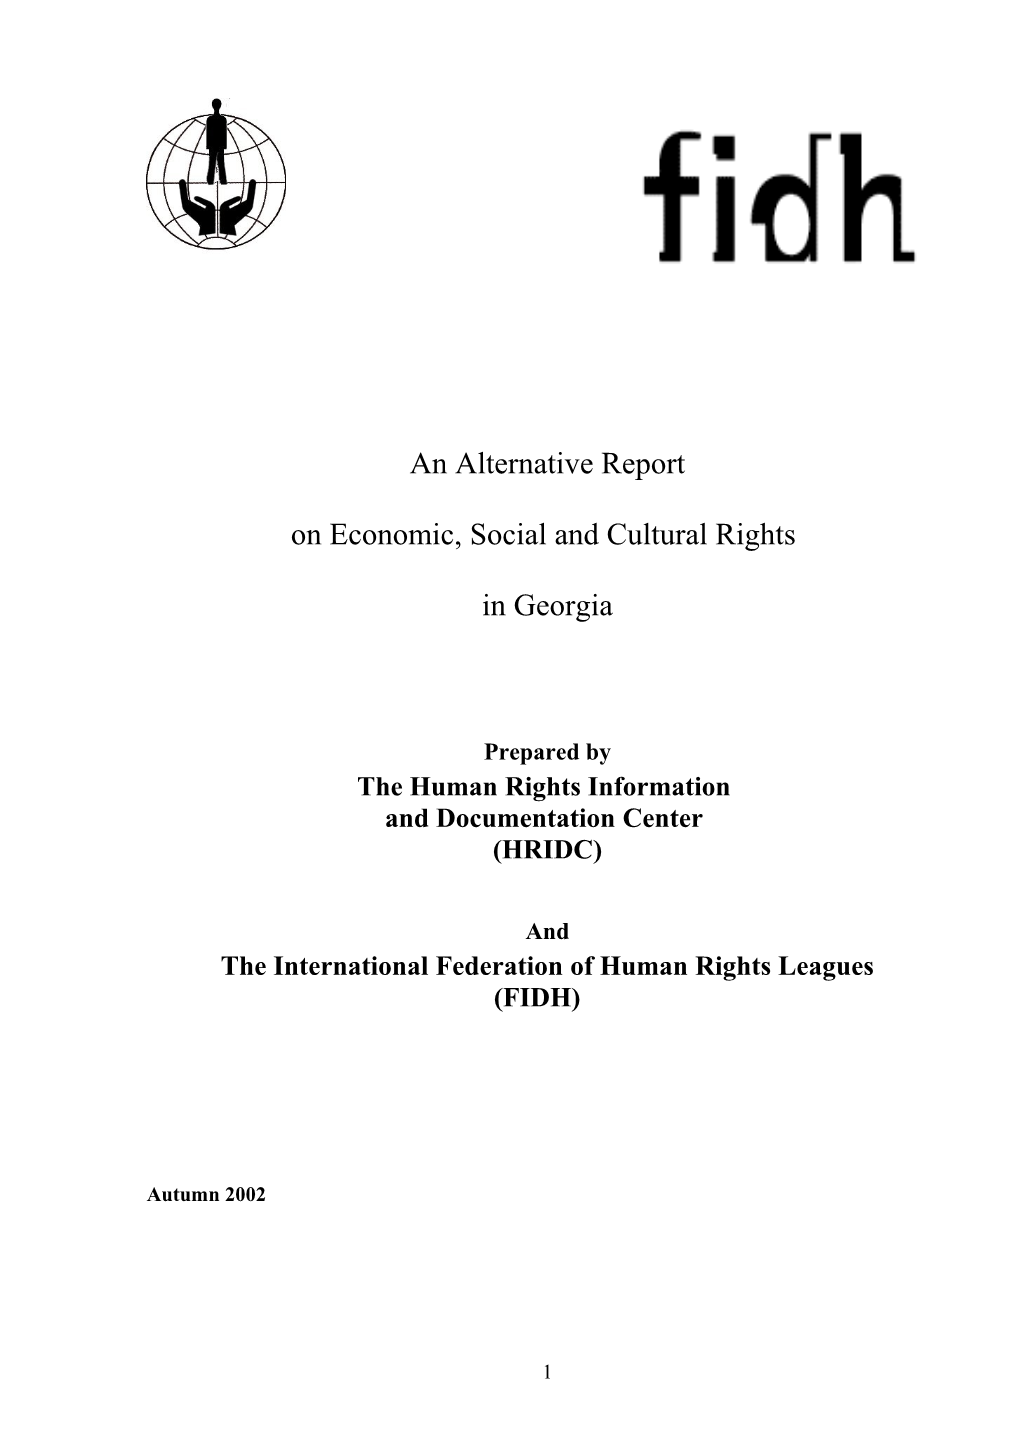 The Human Rights Information